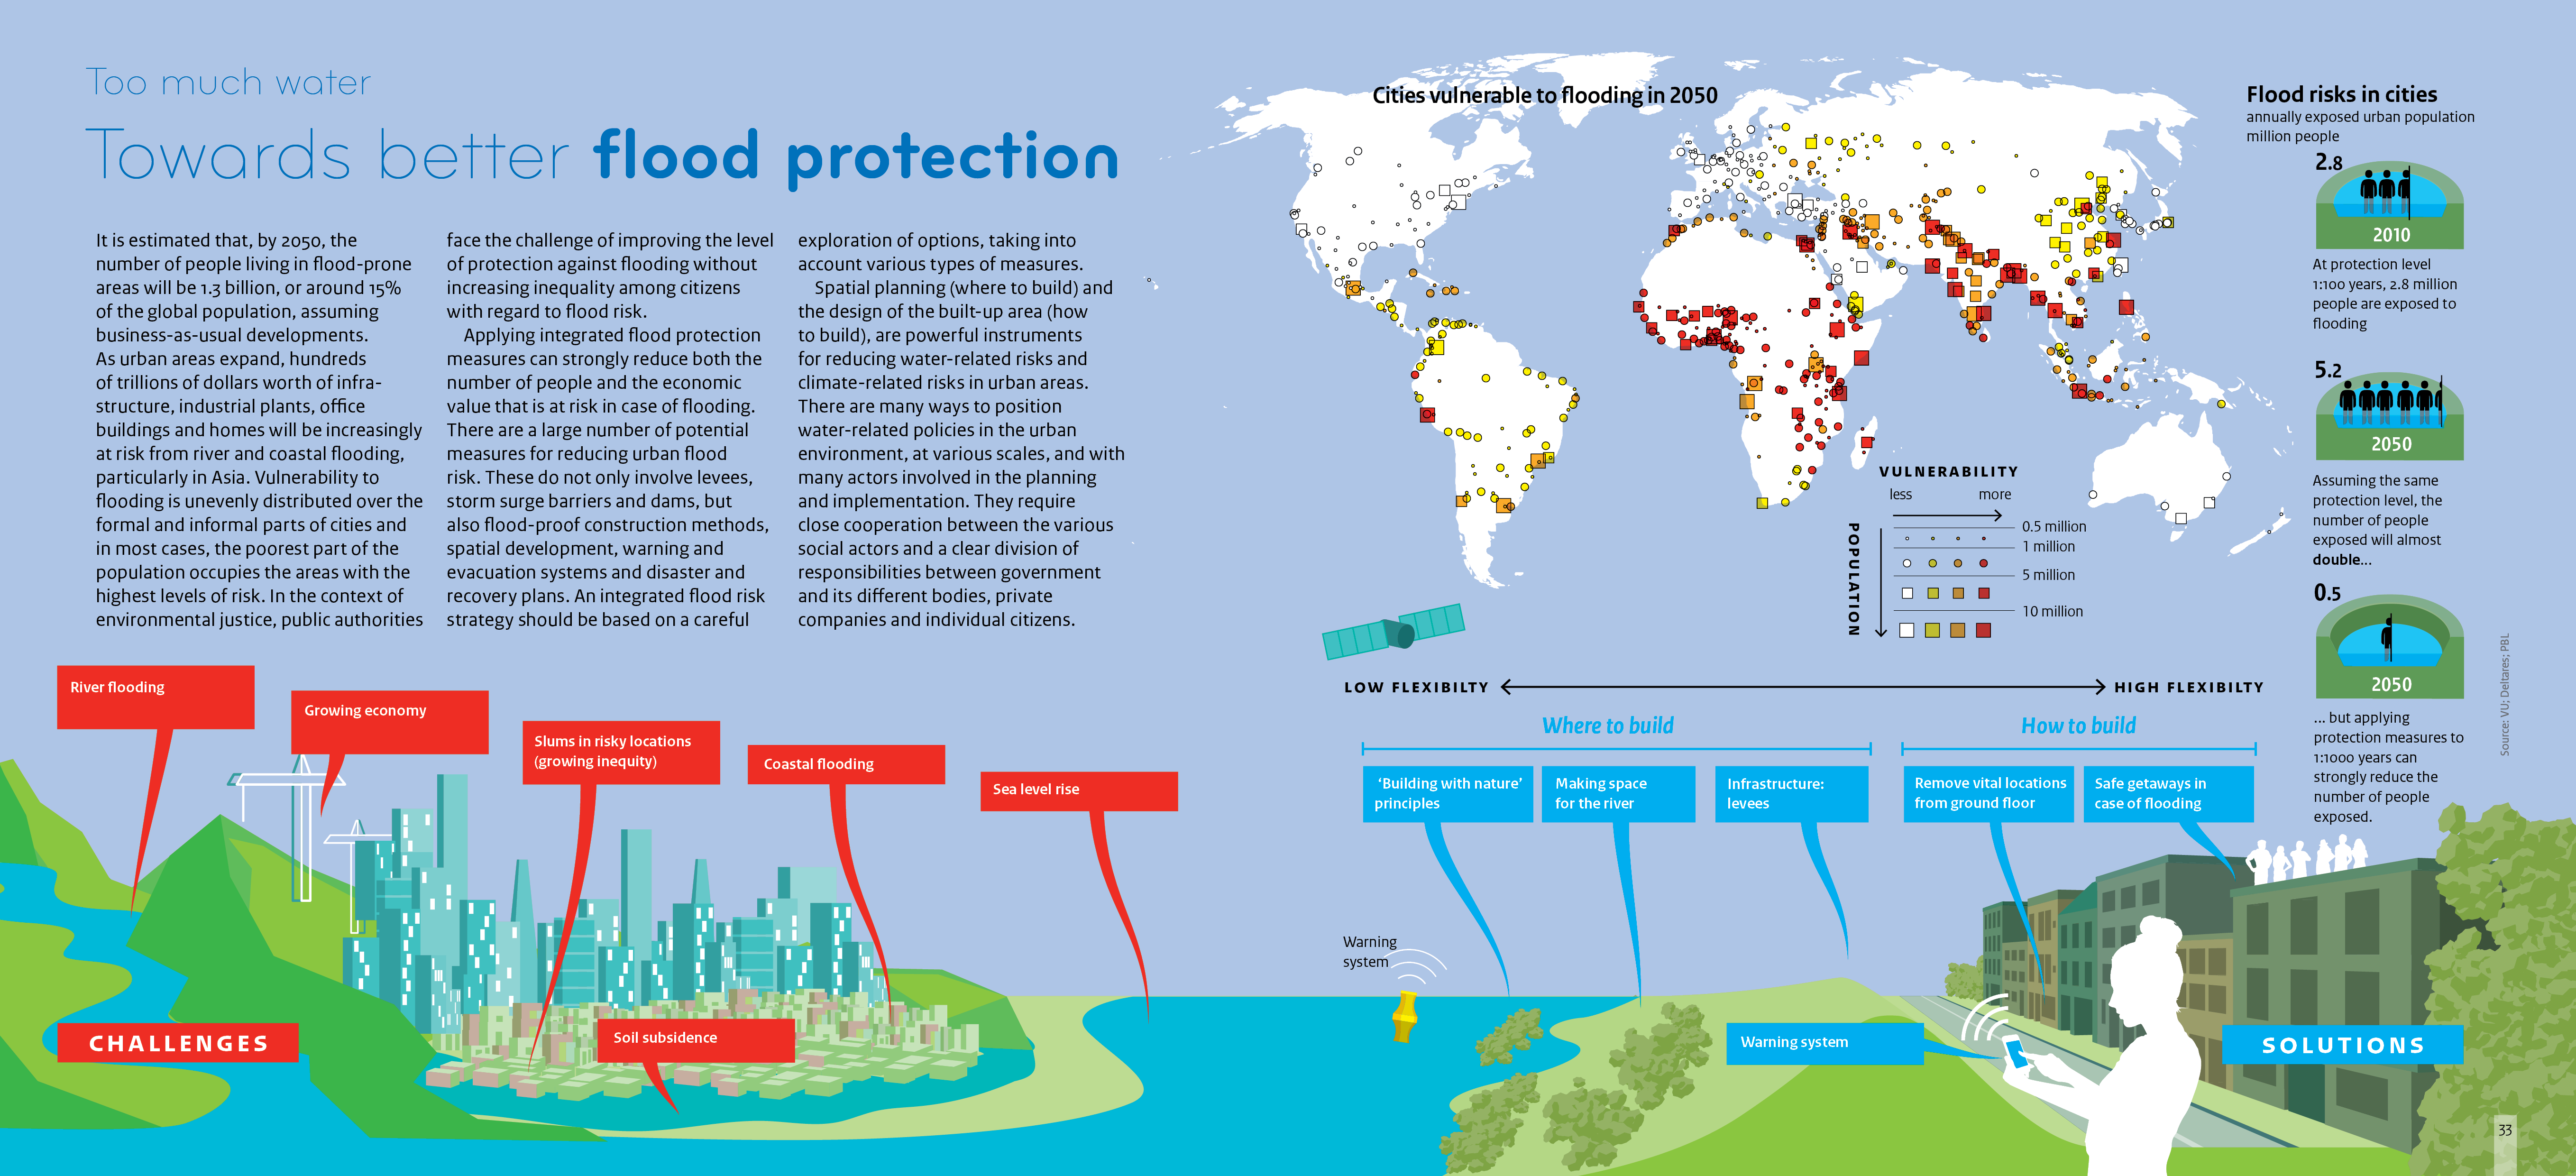 Cities vulnerable to flooding in 2050 are mostly in Sub-Saharan Africa and Southeast Asia, and in coastal zones. Infographic right shows flood risk in cities, where flood risk will double by 2050 at a 1:100 protection level. Illustration shows various challenges including coastal flooding, and solutions, such as building with nature principles.